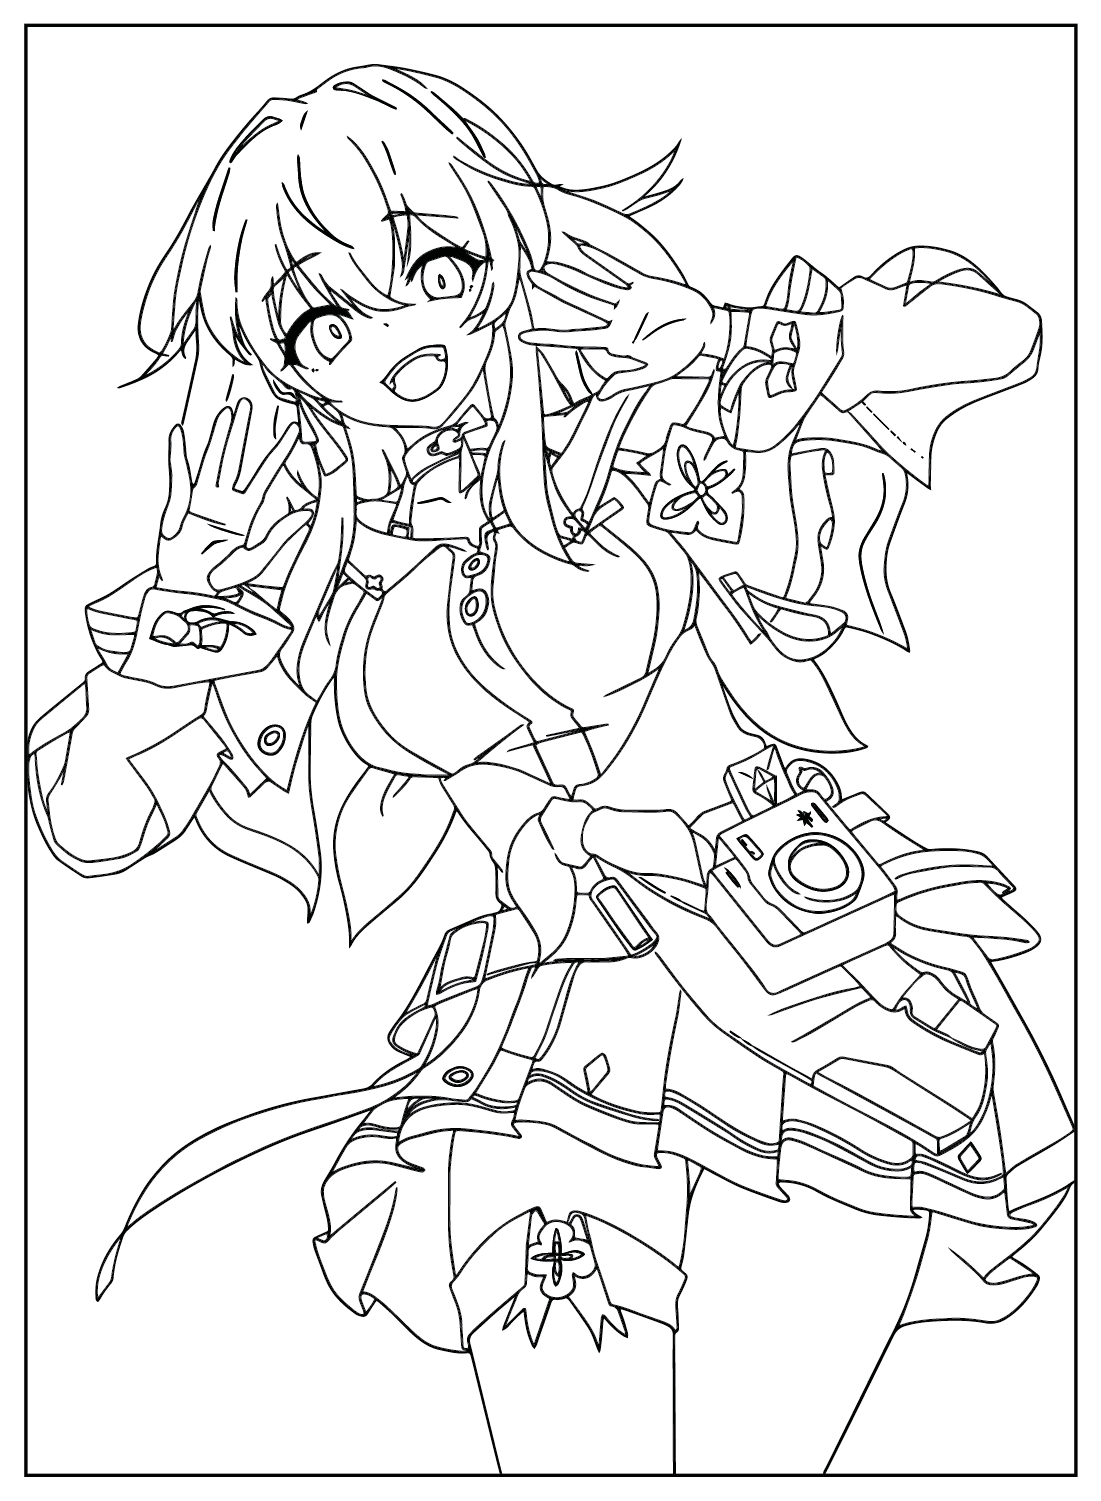 March 7th Coloring Page from Honkai: Star Rail